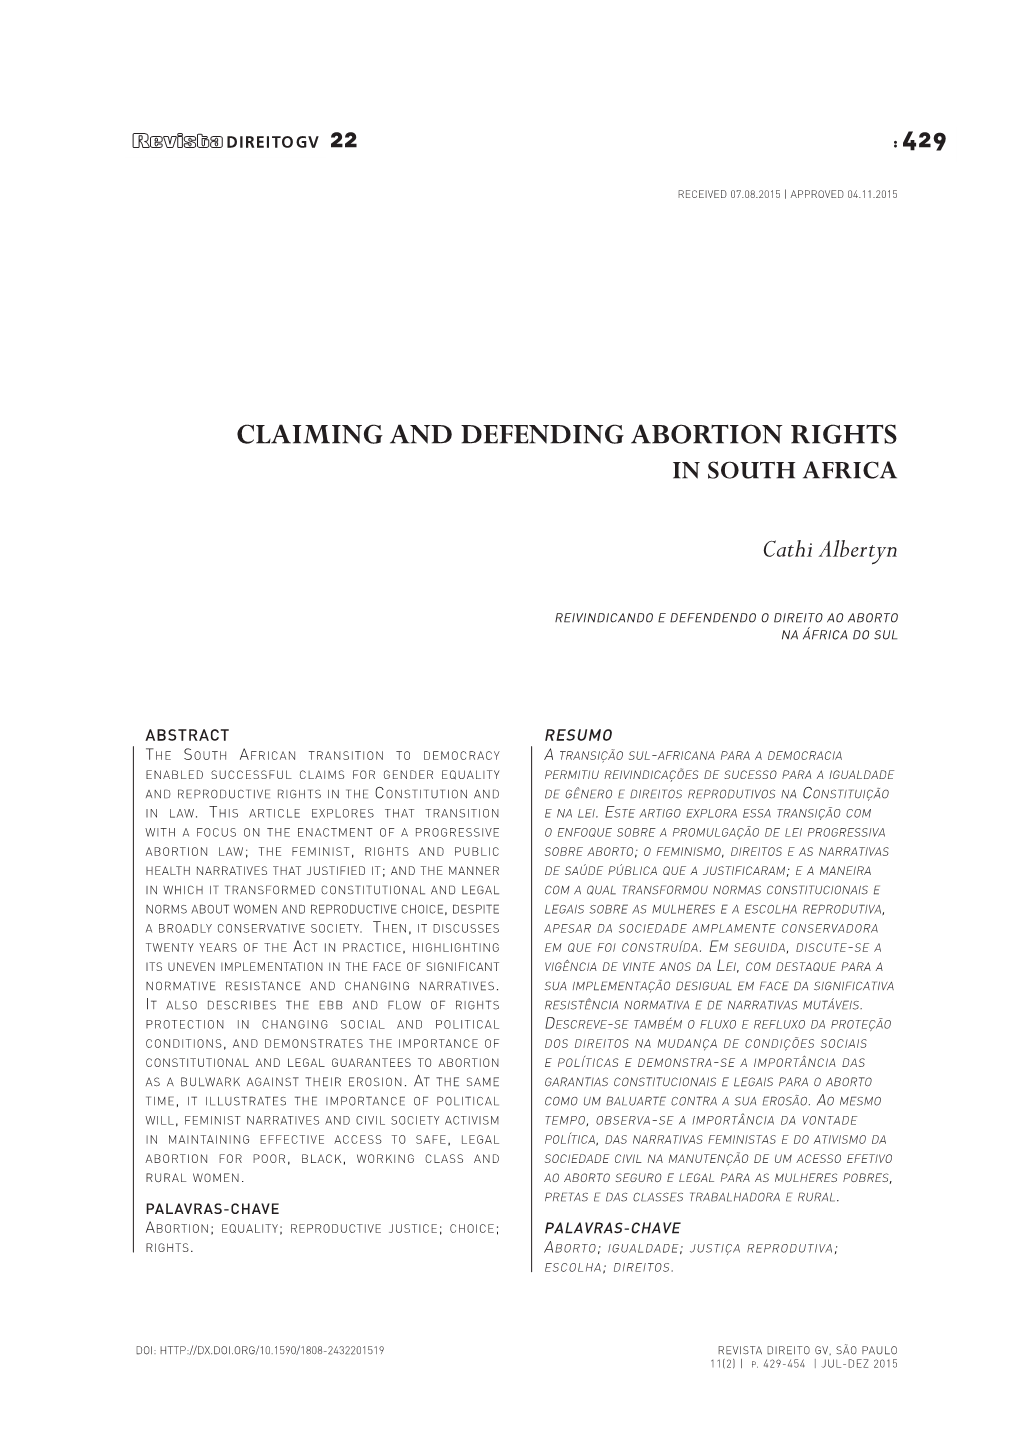 Claiming and Defending Abortion Rights in South Africa